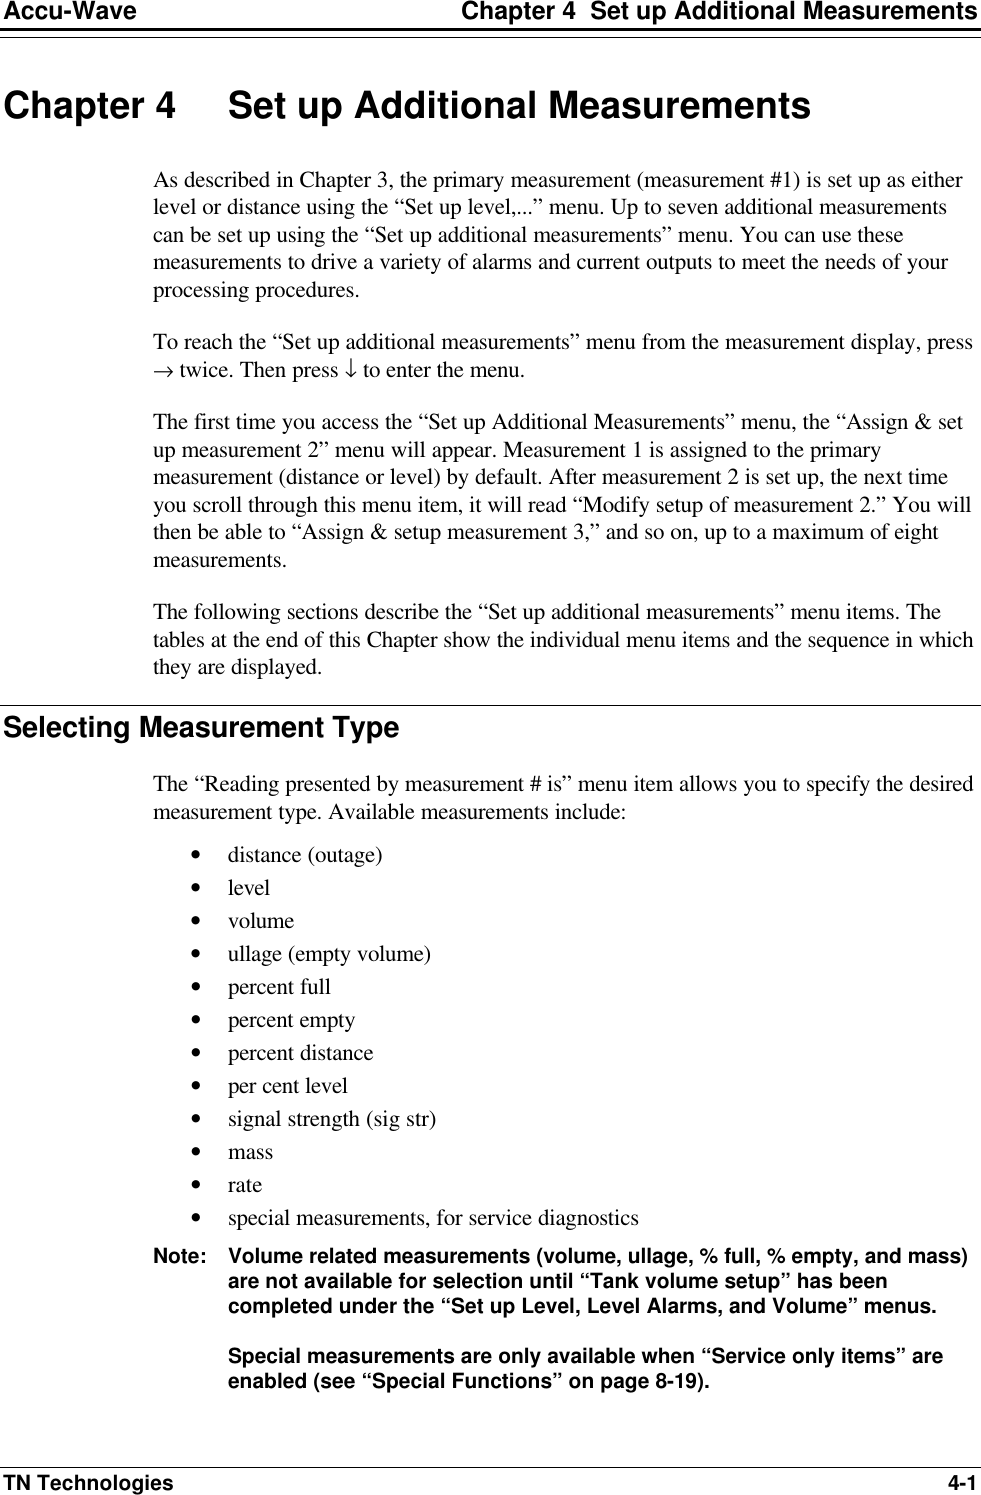 Accu-Wave Chapter 4  Set up Additional Measurements TN Technologies 4-1 Chapter 4 Set up Additional Measurements As described in Chapter 3, the primary measurement (measurement #1) is set up as either level or distance using the “Set up level,...” menu. Up to seven additional measurements can be set up using the “Set up additional measurements” menu. You can use these measurements to drive a variety of alarms and current outputs to meet the needs of your processing procedures. To reach the “Set up additional measurements” menu from the measurement display, press → twice. Then press ↓ to enter the menu.  The first time you access the “Set up Additional Measurements” menu, the “Assign &amp; set up measurement 2” menu will appear. Measurement 1 is assigned to the primary measurement (distance or level) by default. After measurement 2 is set up, the next time you scroll through this menu item, it will read “Modify setup of measurement 2.” You will then be able to “Assign &amp; setup measurement 3,” and so on, up to a maximum of eight measurements. The following sections describe the “Set up additional measurements” menu items. The tables at the end of this Chapter show the individual menu items and the sequence in which they are displayed. Selecting Measurement Type The “Reading presented by measurement # is” menu item allows you to specify the desired measurement type. Available measurements include: • distance (outage) • level • volume • ullage (empty volume) • percent full • percent empty • percent distance • per cent level • signal strength (sig str) • mass • rate • special measurements, for service diagnostics  Note: Volume related measurements (volume, ullage, % full, % empty, and mass) are not available for selection until “Tank volume setup” has been completed under the “Set up Level, Level Alarms, and Volume” menus.  Special measurements are only available when “Service only items” are enabled (see “Special Functions” on page 8-19).  